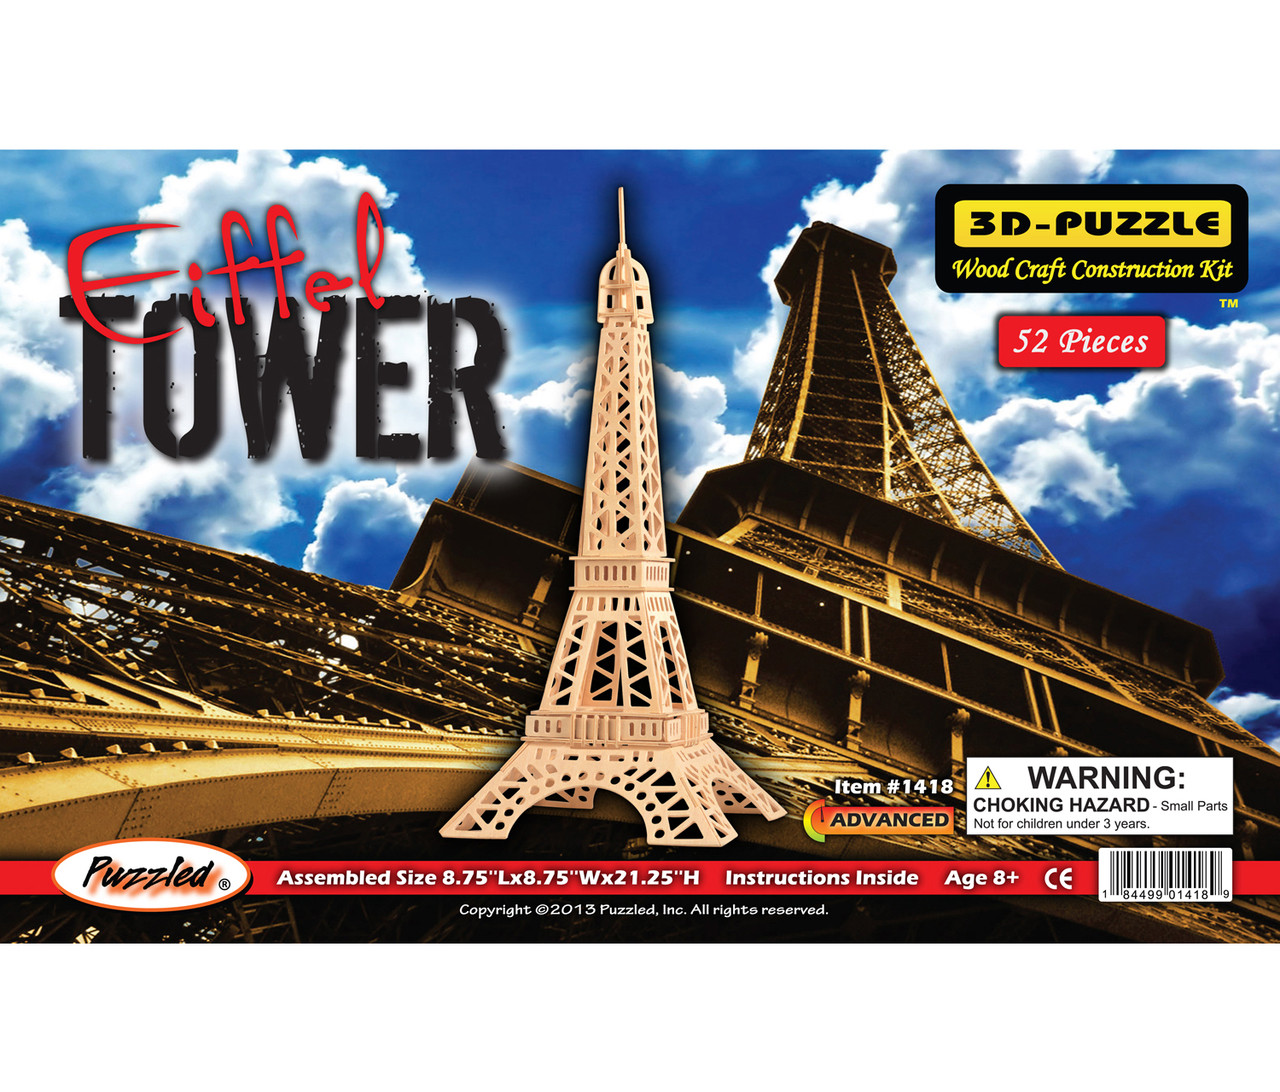 Eiffel Tower 3D PUZZLE Ravensburger build step by step 